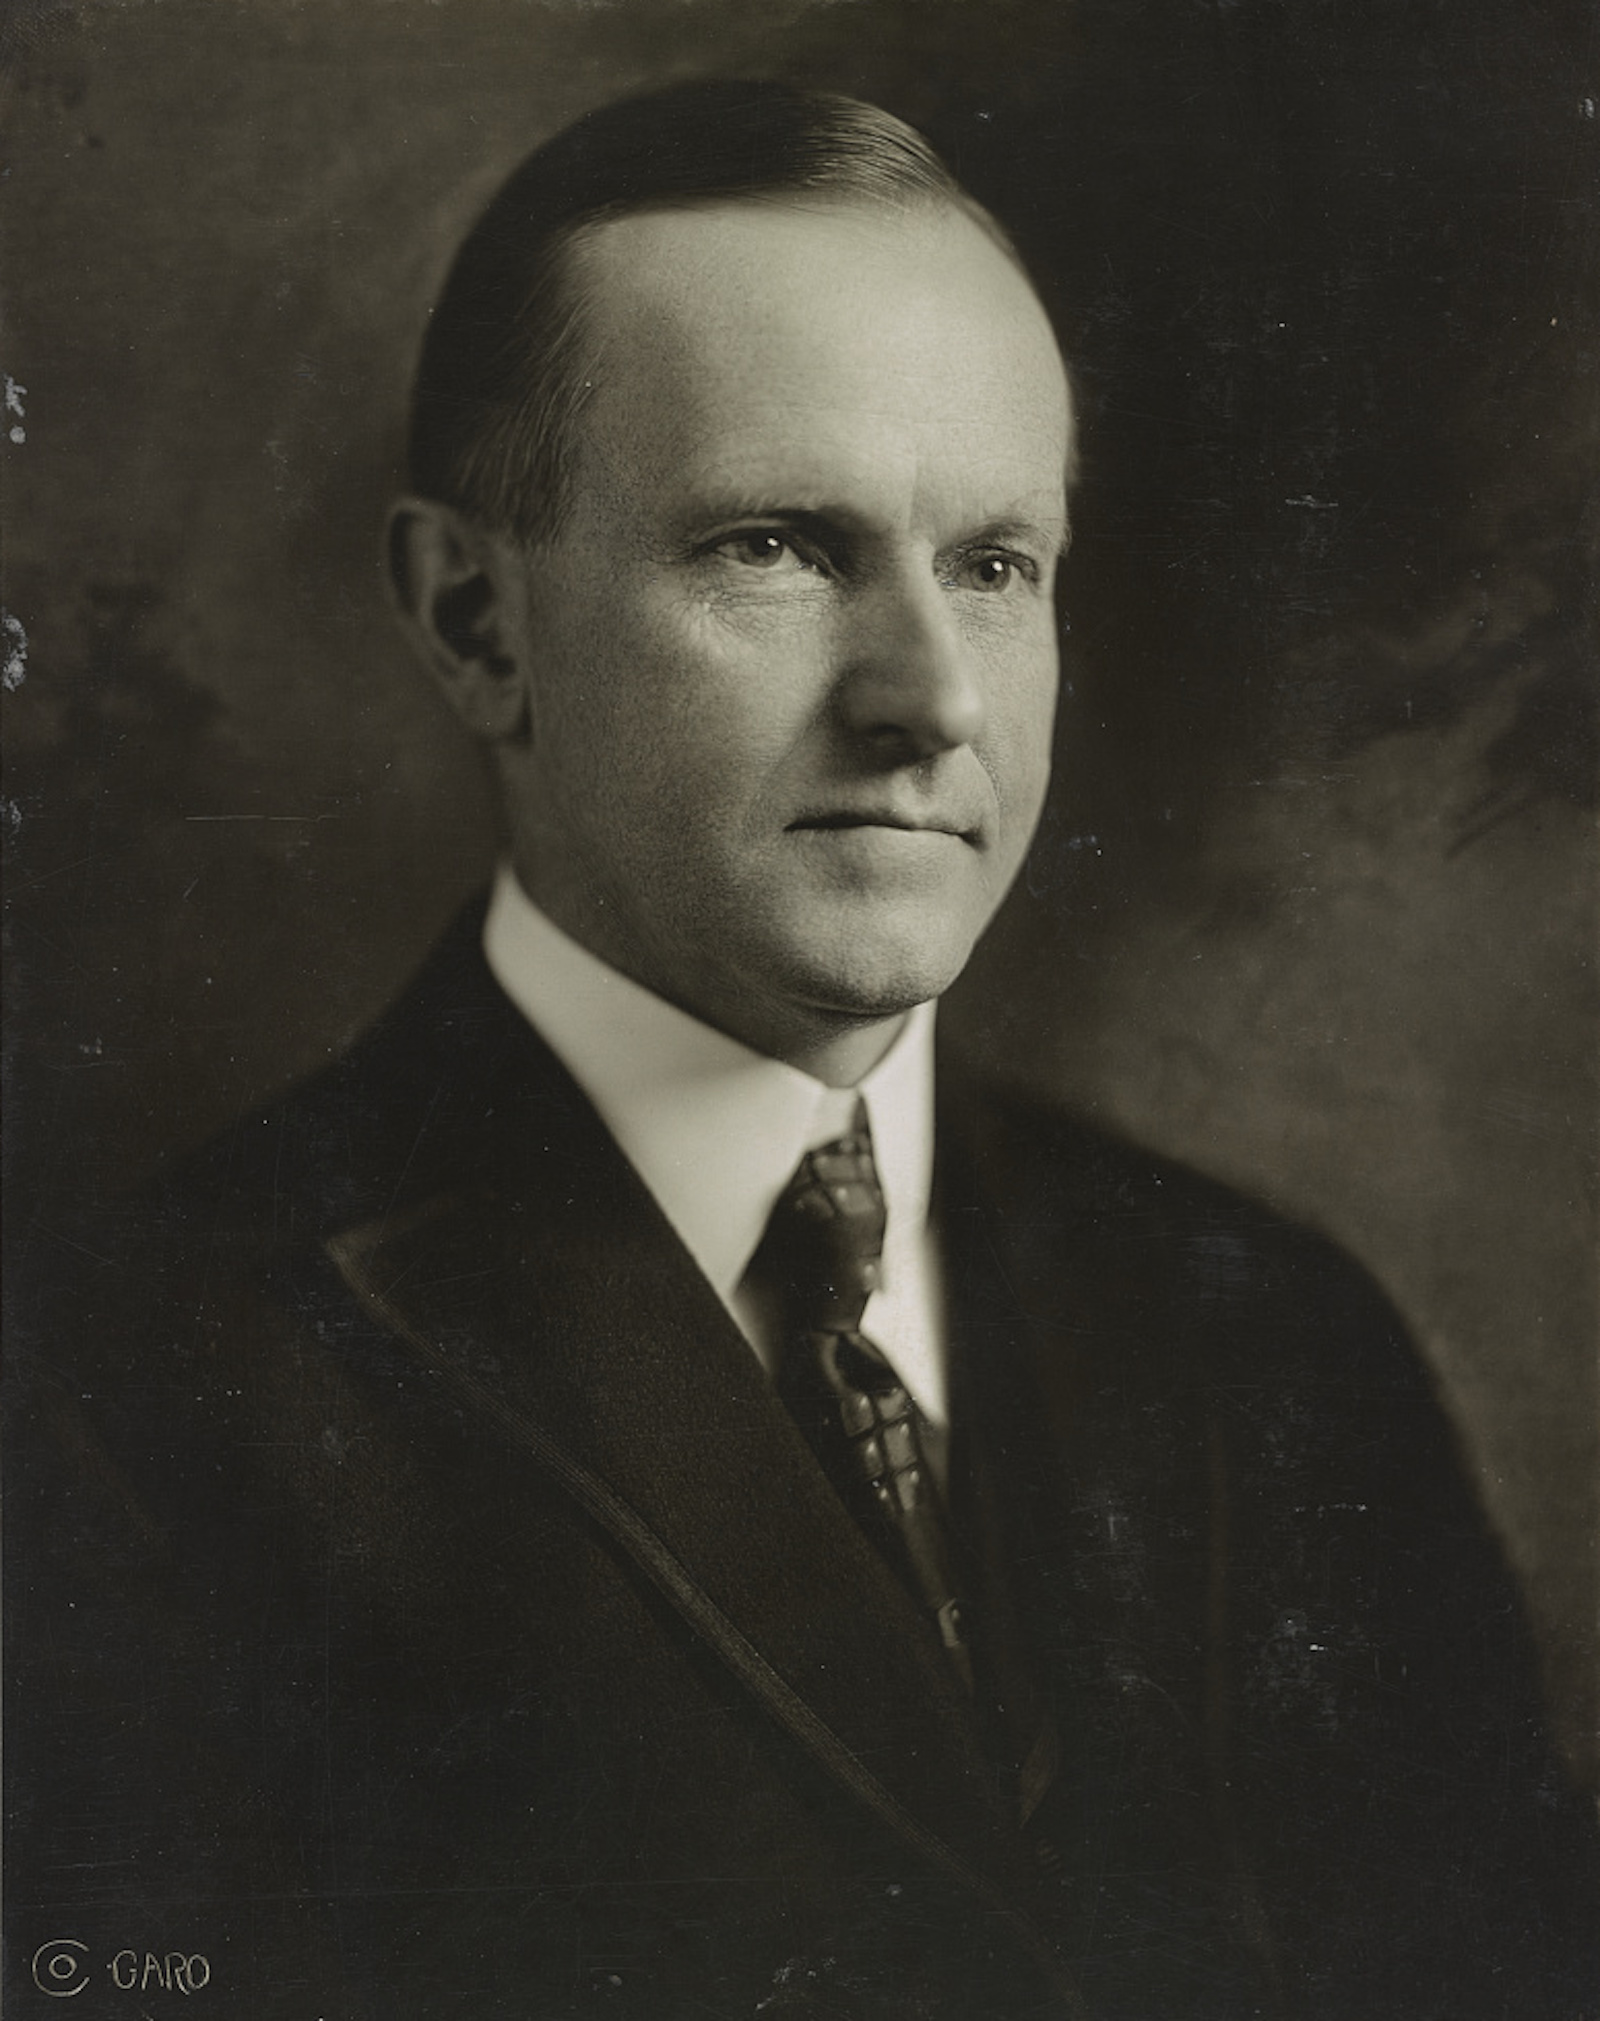 Calvin Coolidge, then governor of Massachusetts, 1920. Library of Congress. Public Domain.